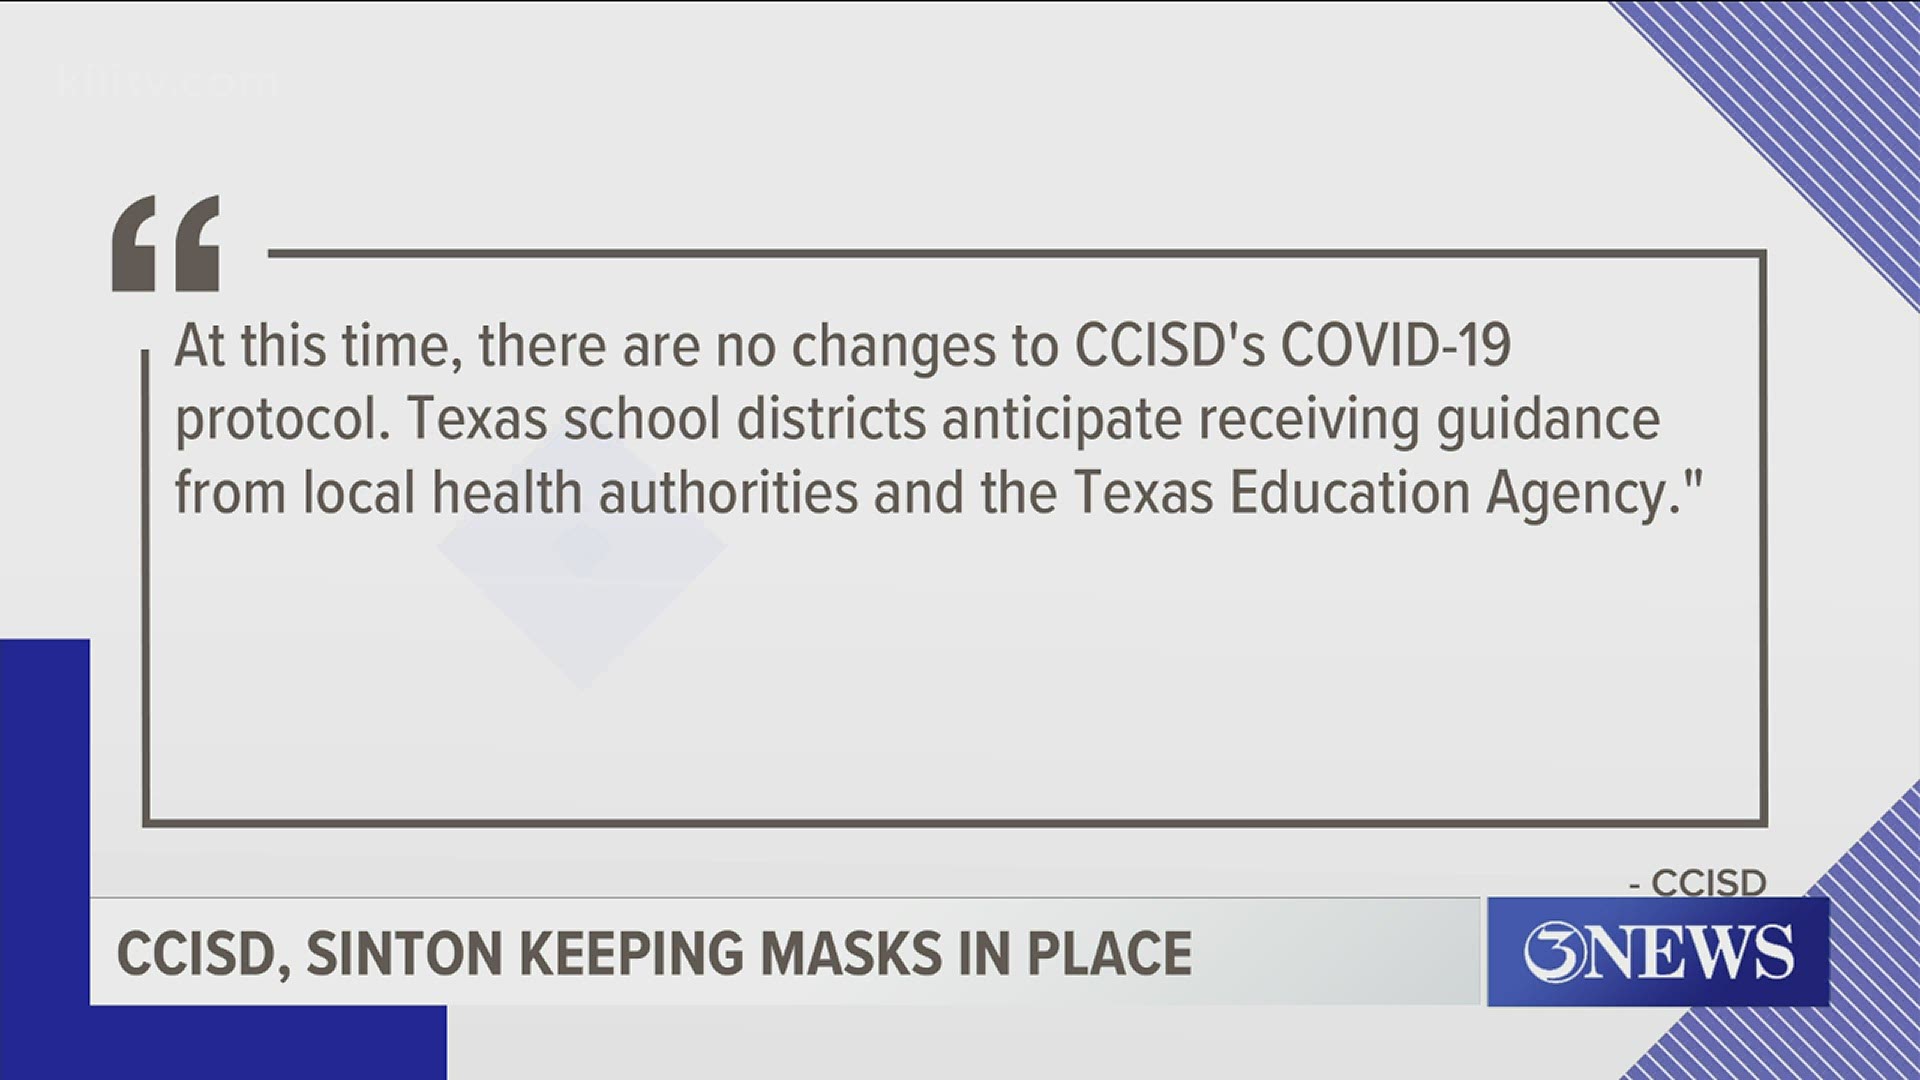 Governor Abbott announced on Tuesday that he is lifting the statewide mask mandate.